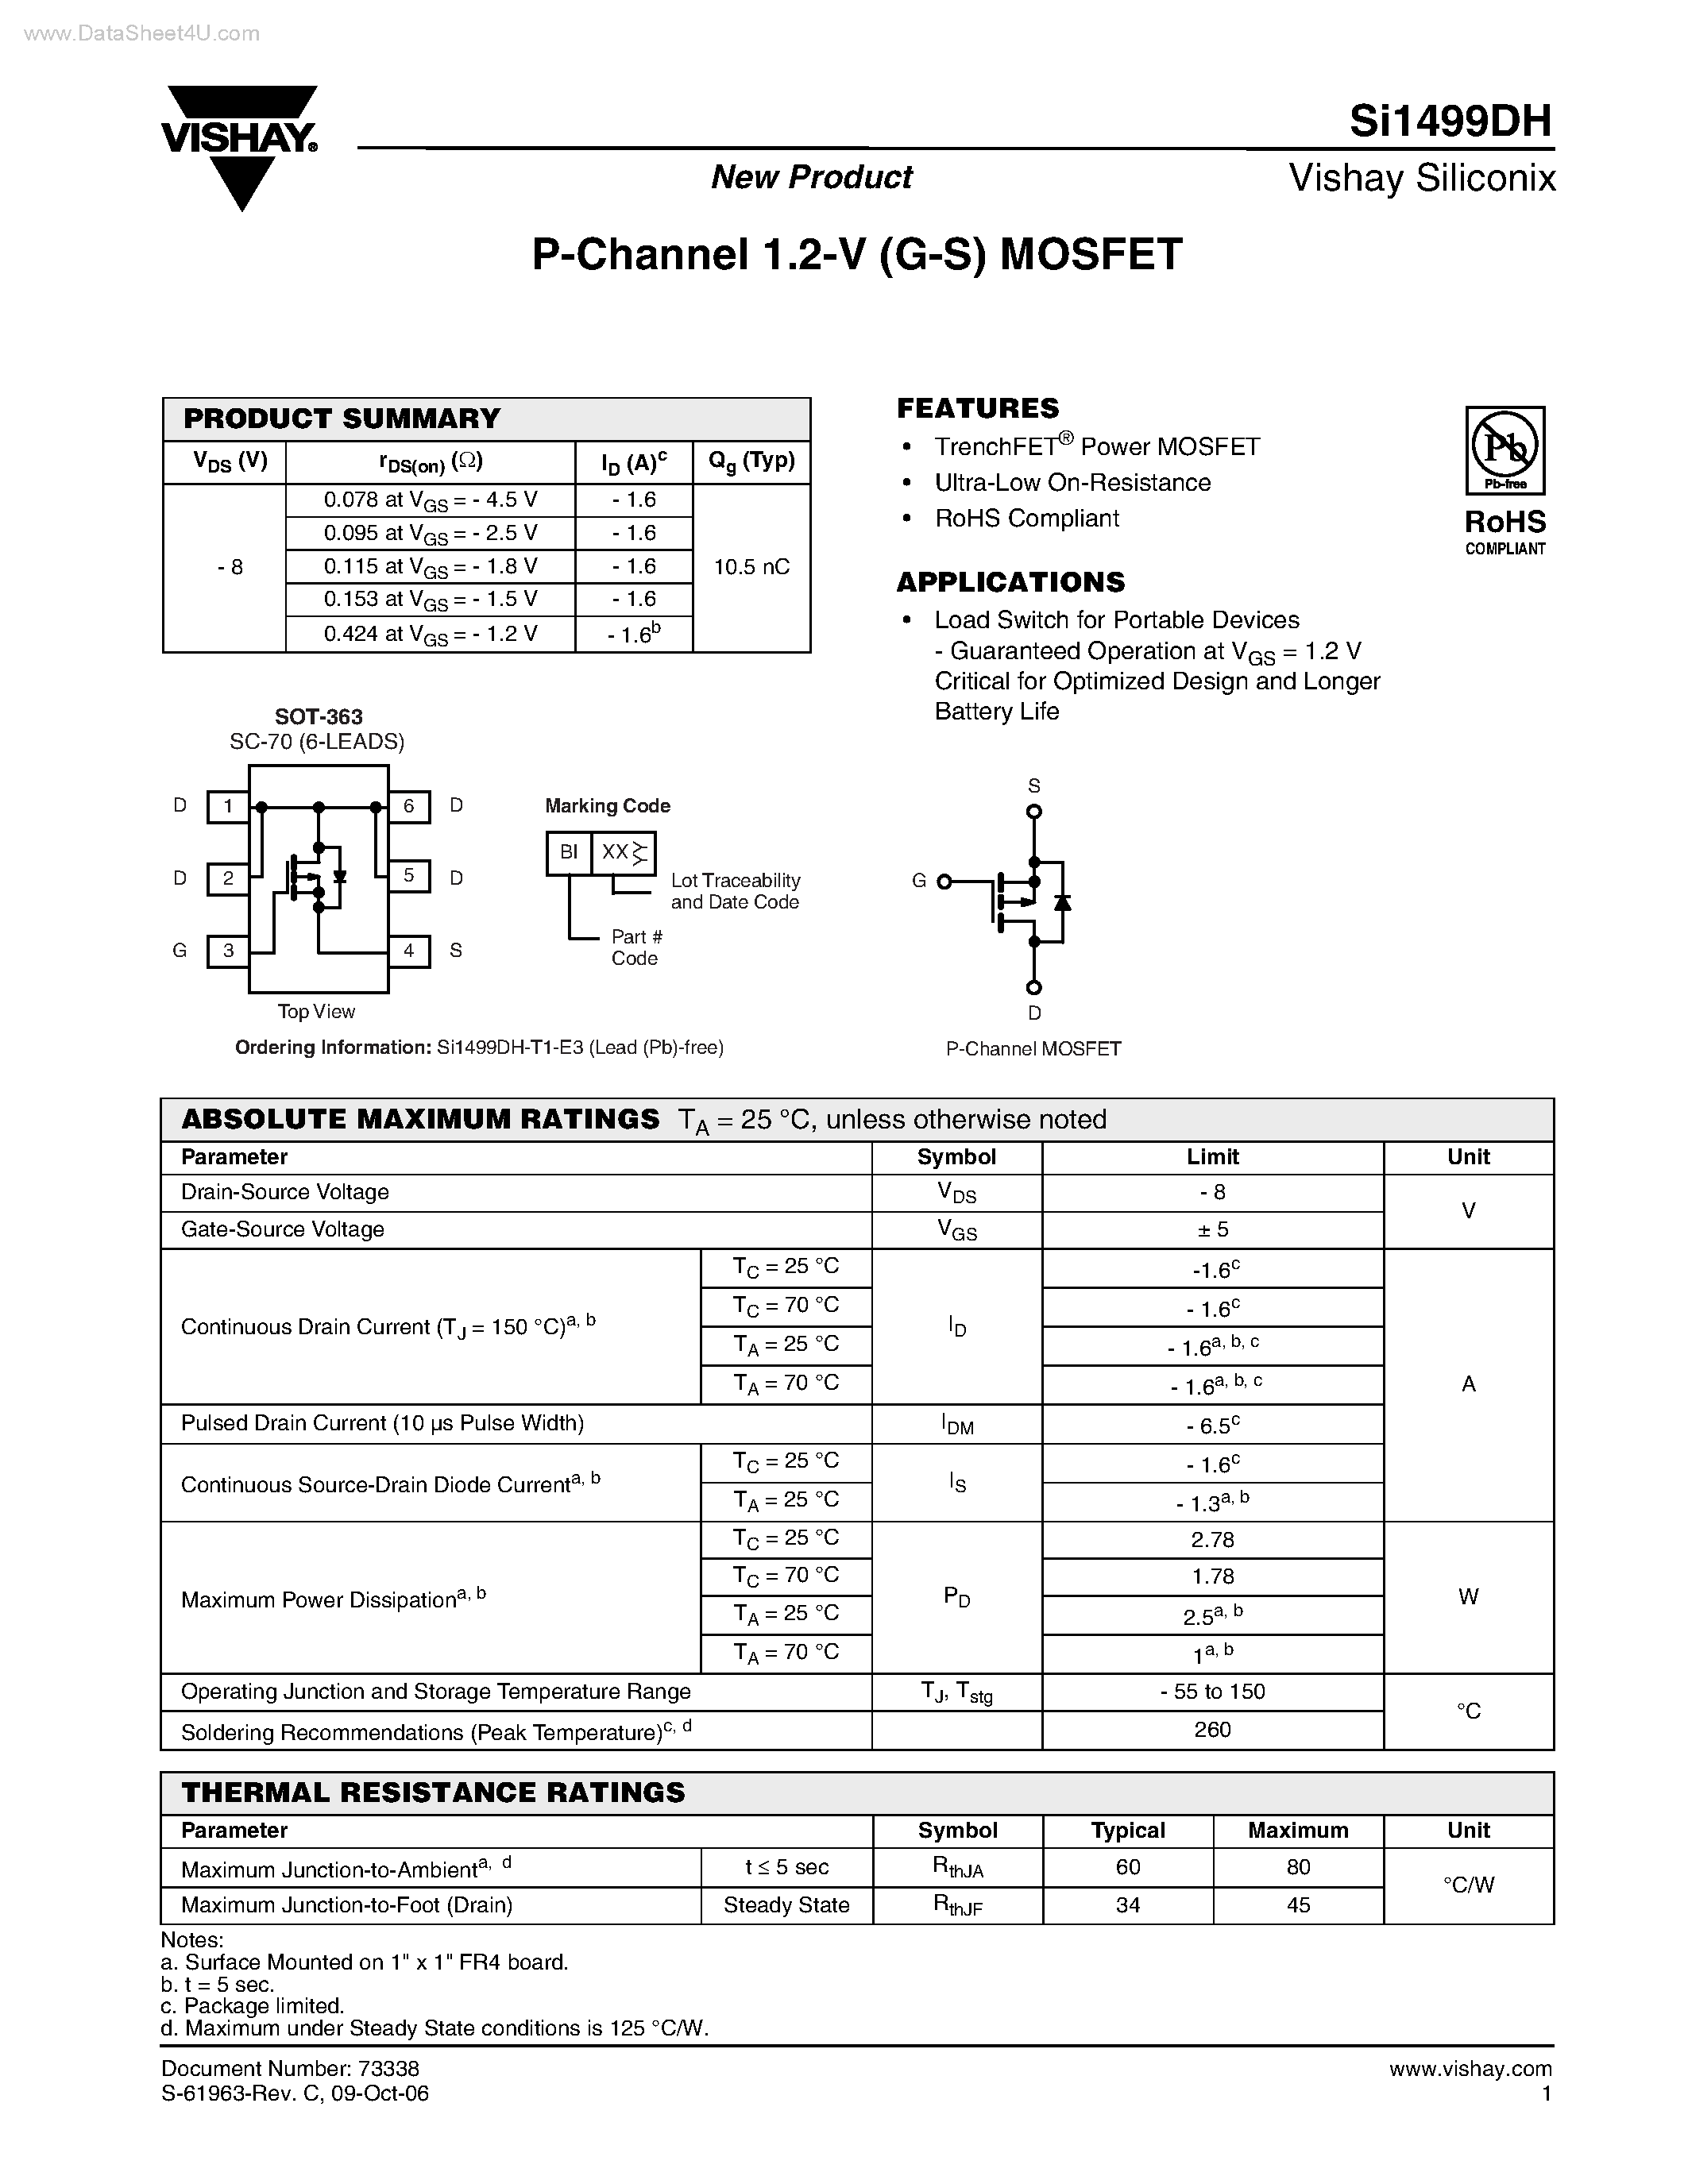 Datasheet SI1499DH - P-Channel MOSFET page 1